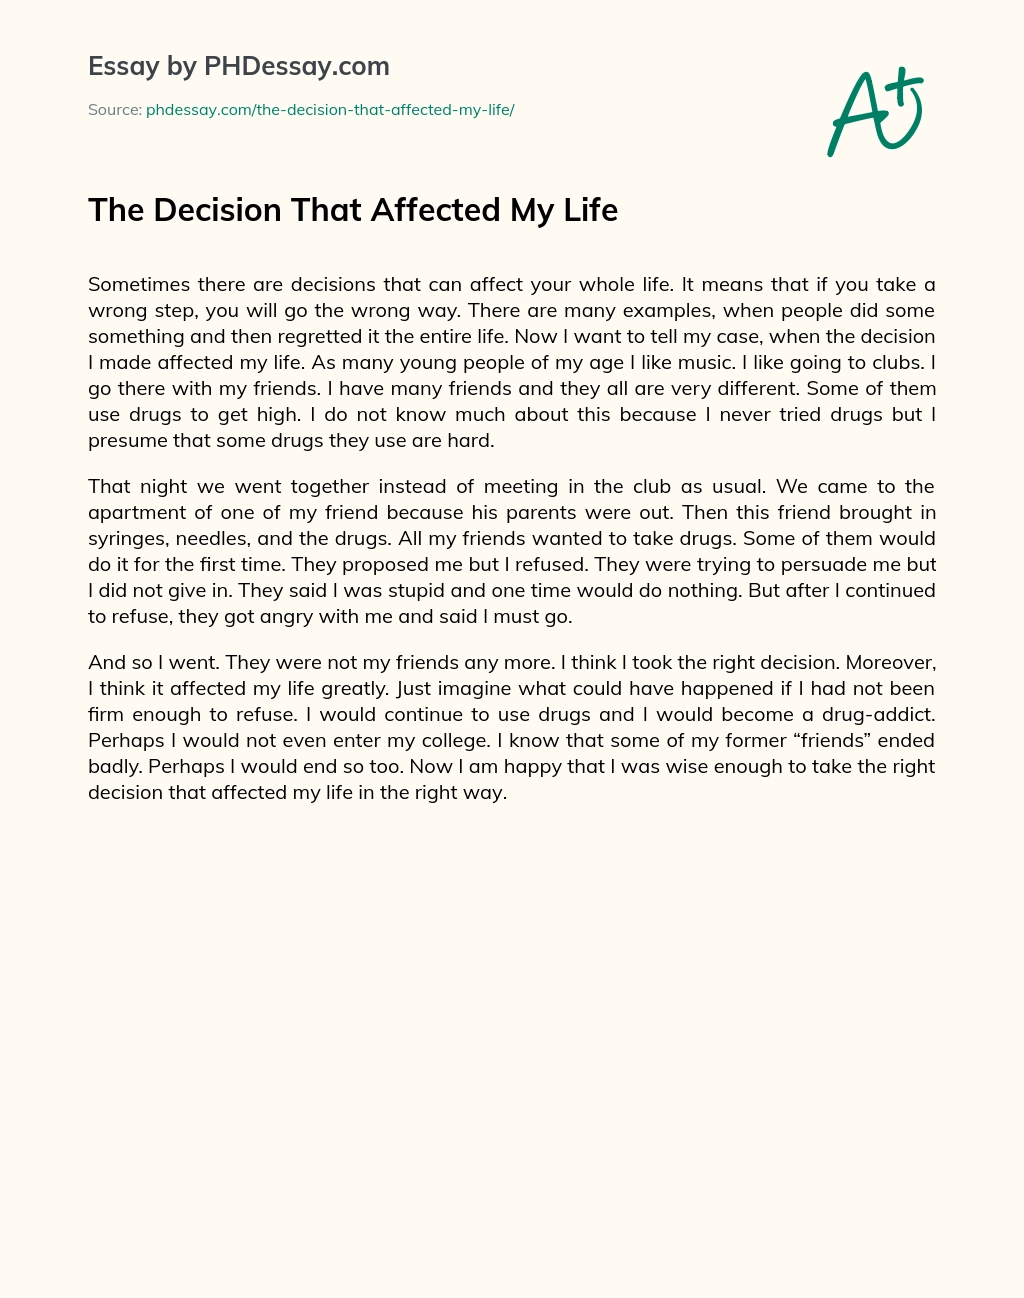 The Decision That Affected My Life essay